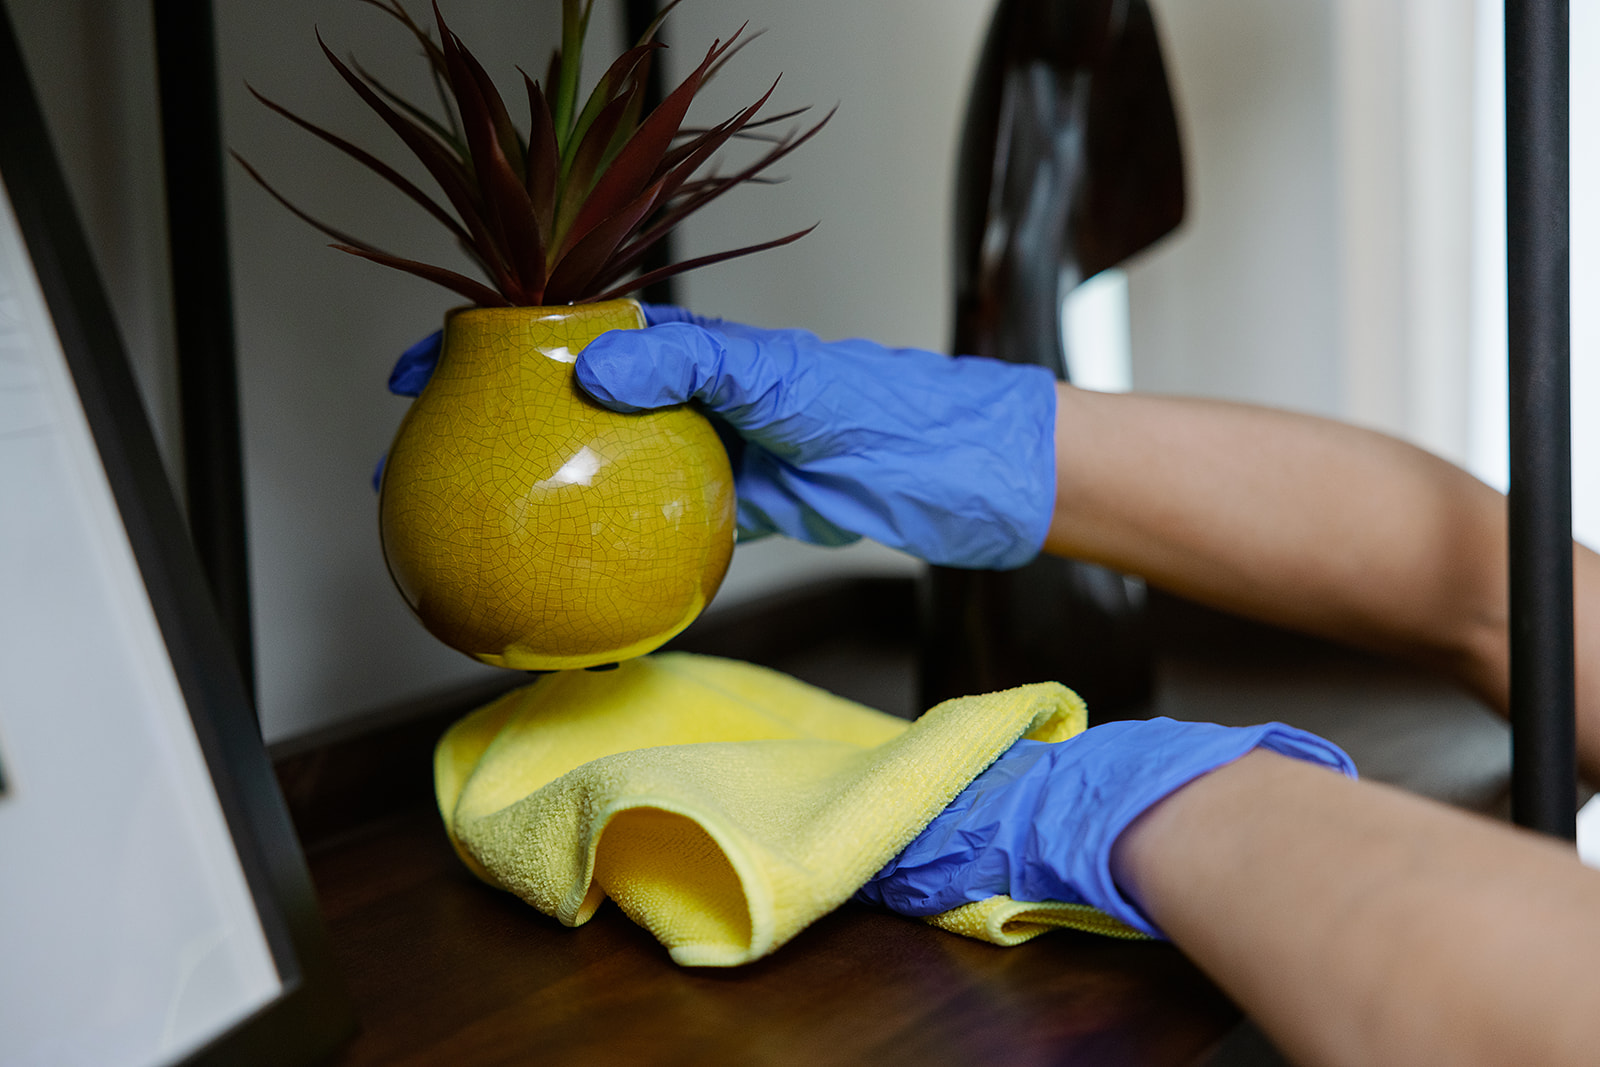 Banner House Cleaning Service in McKinney: Regular Cleanings Help Make Life Easier